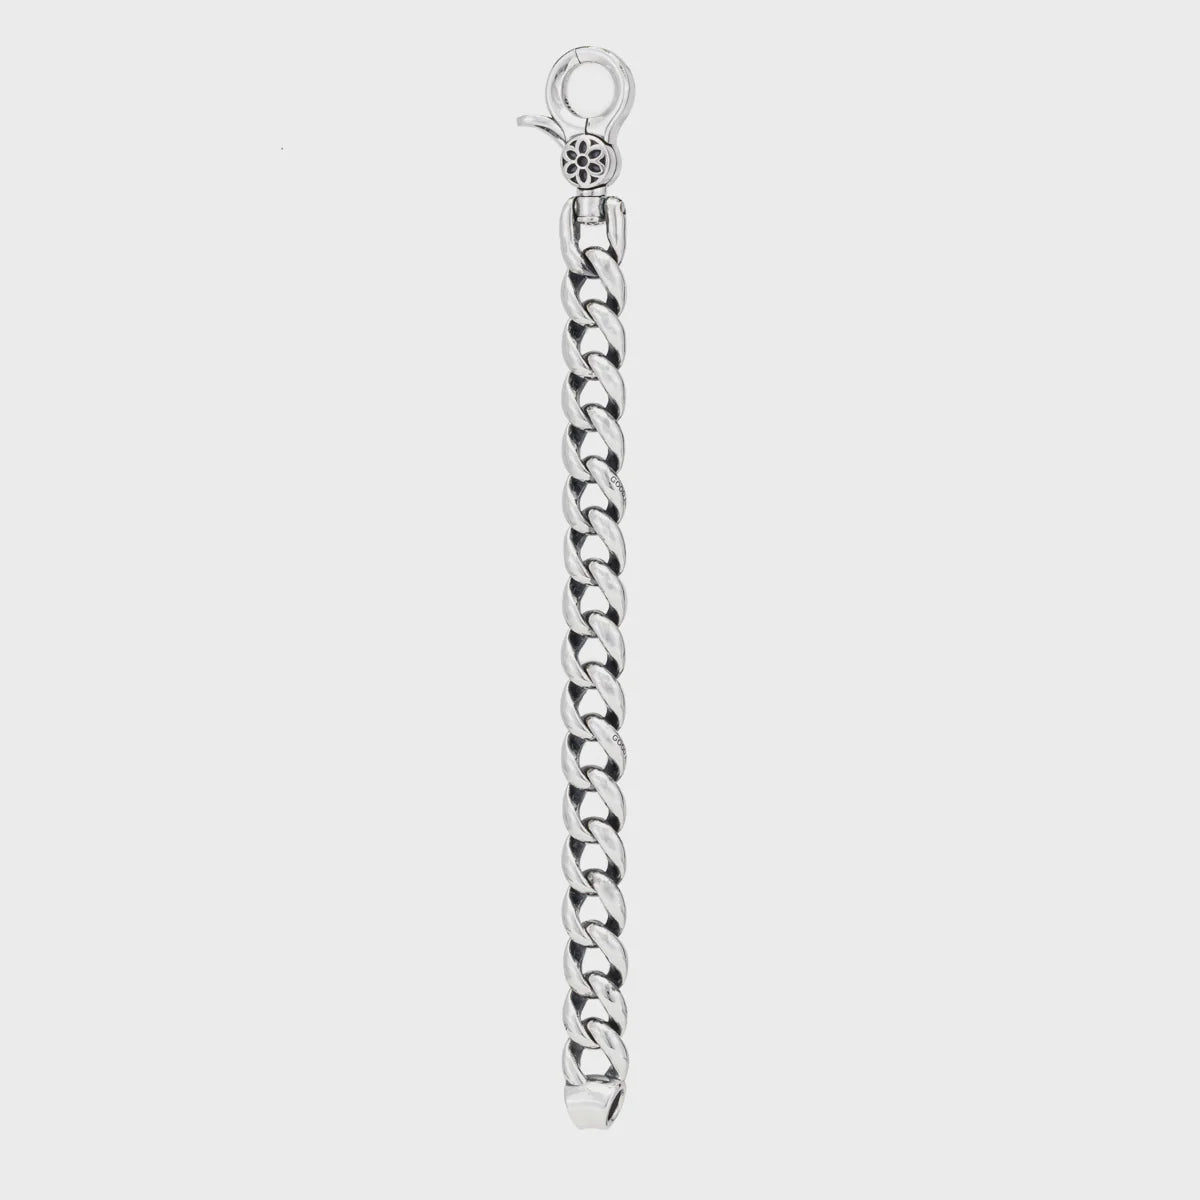 Good Art The Shorty Wallet Chain A